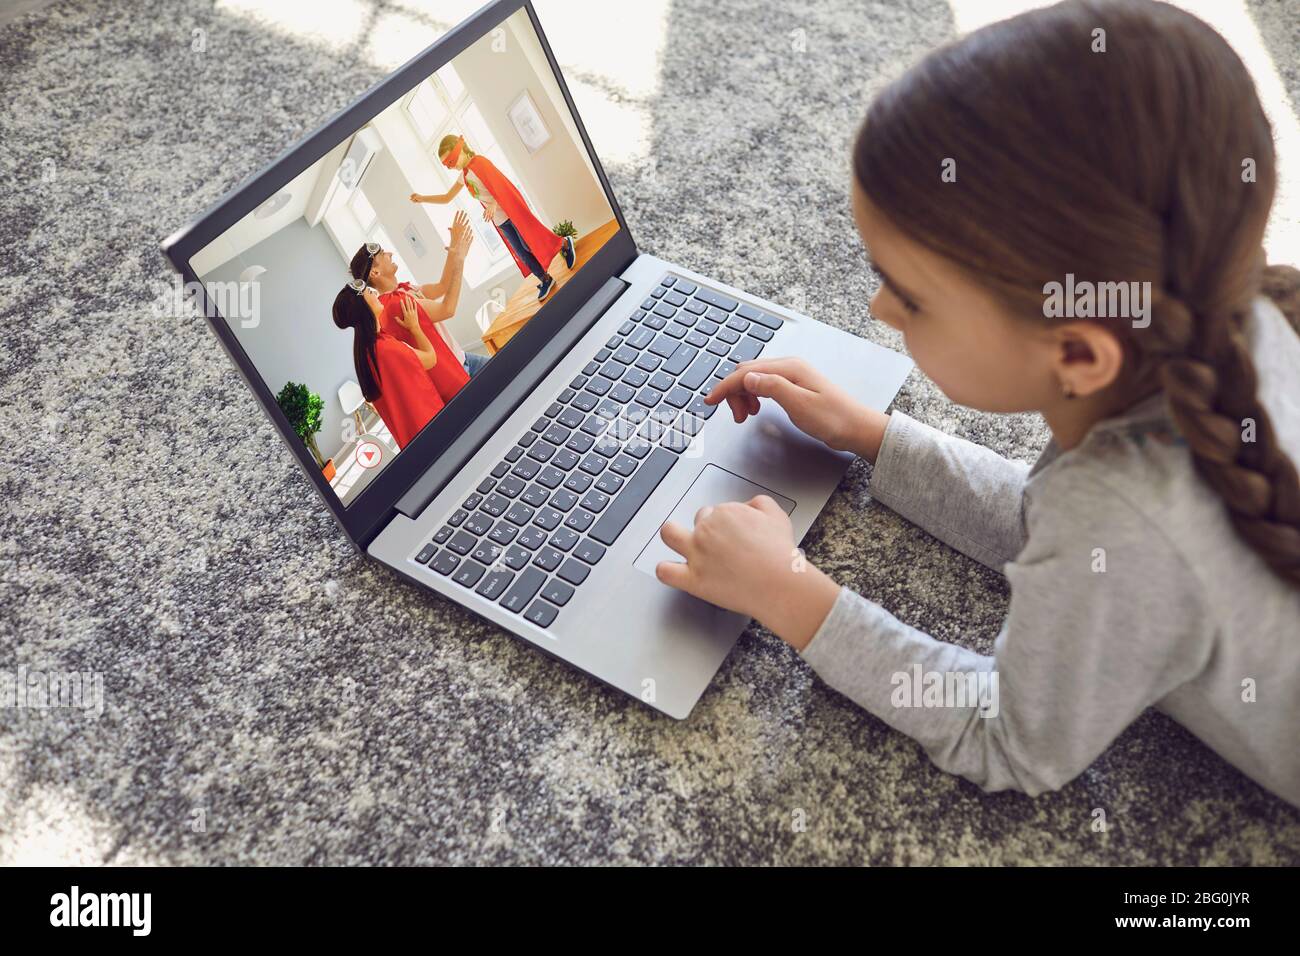 A child uses a laptop to watch home videos in a room on the floor. Stock Photo